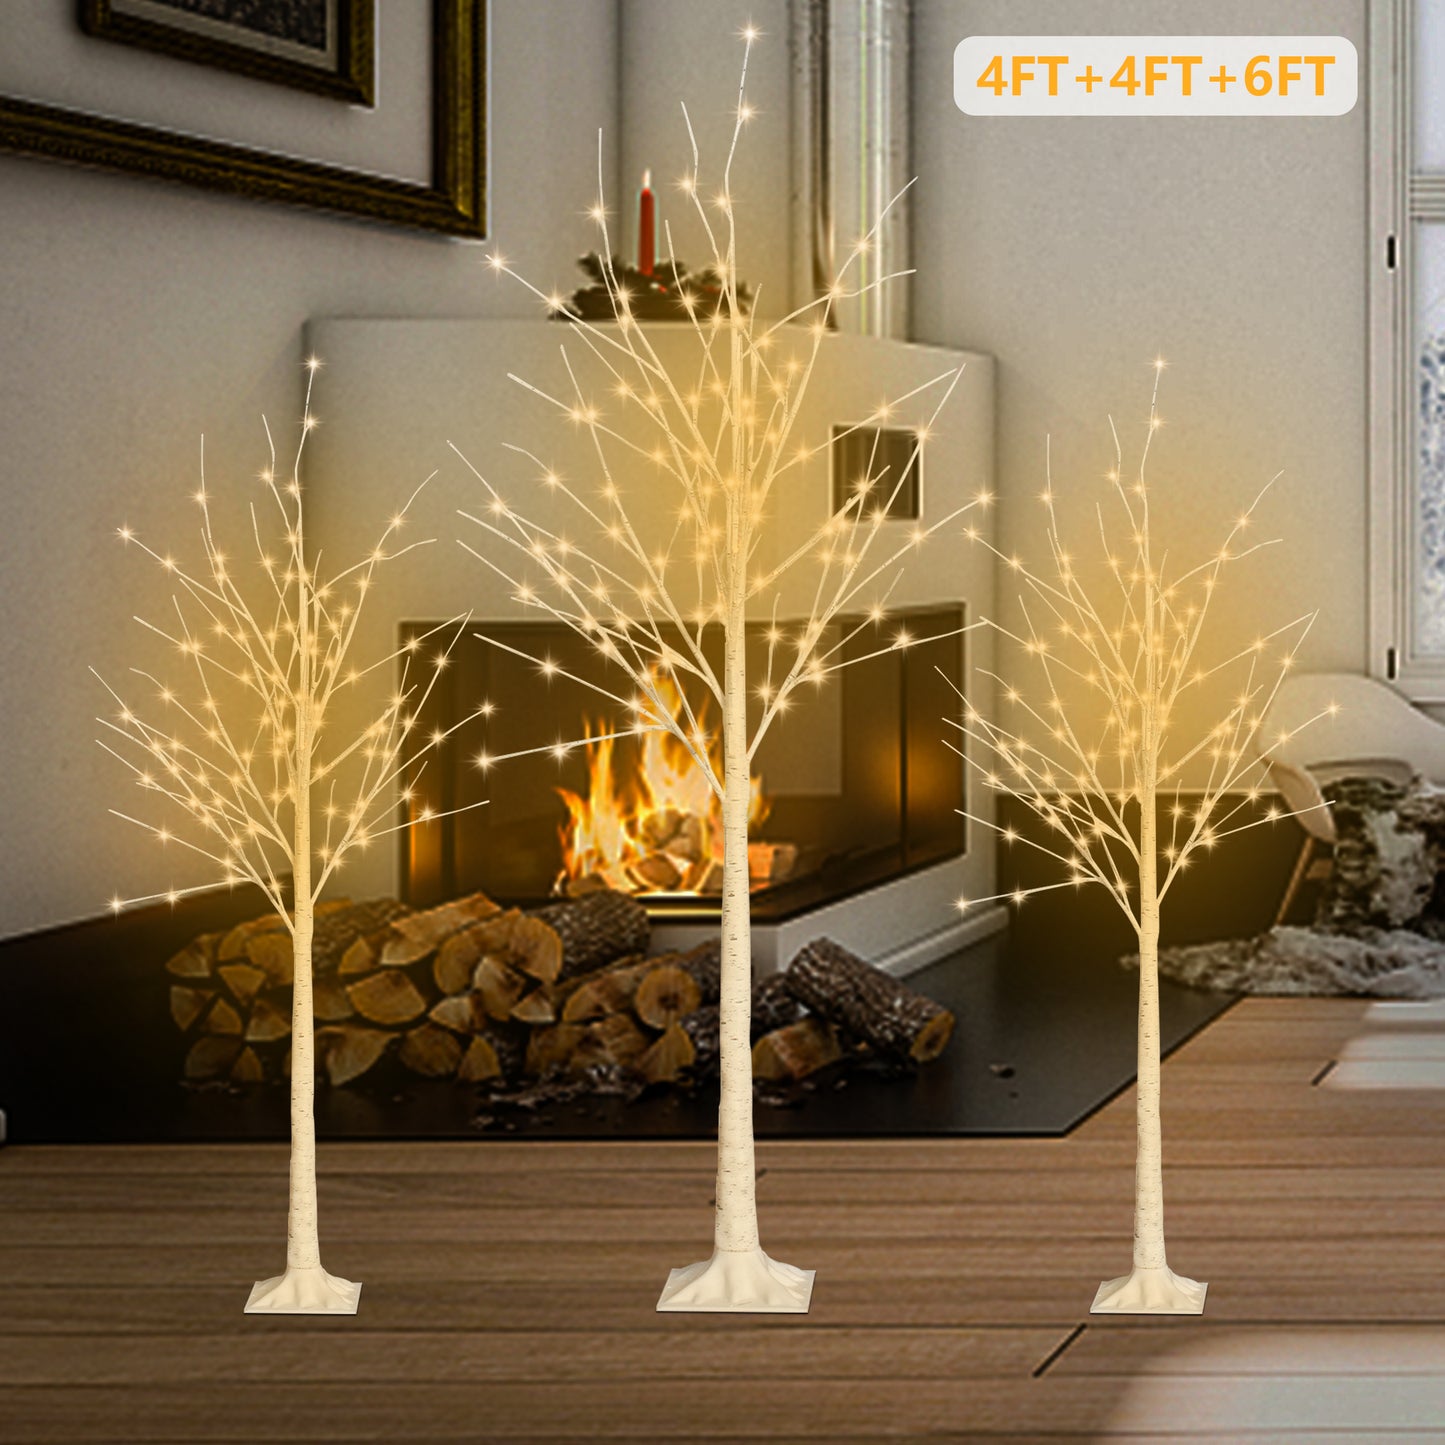 4ft, 4ft and 6ft Birch Tree, Set of 3, Birch Tree with Warm White LED Lights, for Christmas Decoration, Fits for Indoor Outdoor Garden Party Wedding, Lighted Christmas Tree for Home, D4005